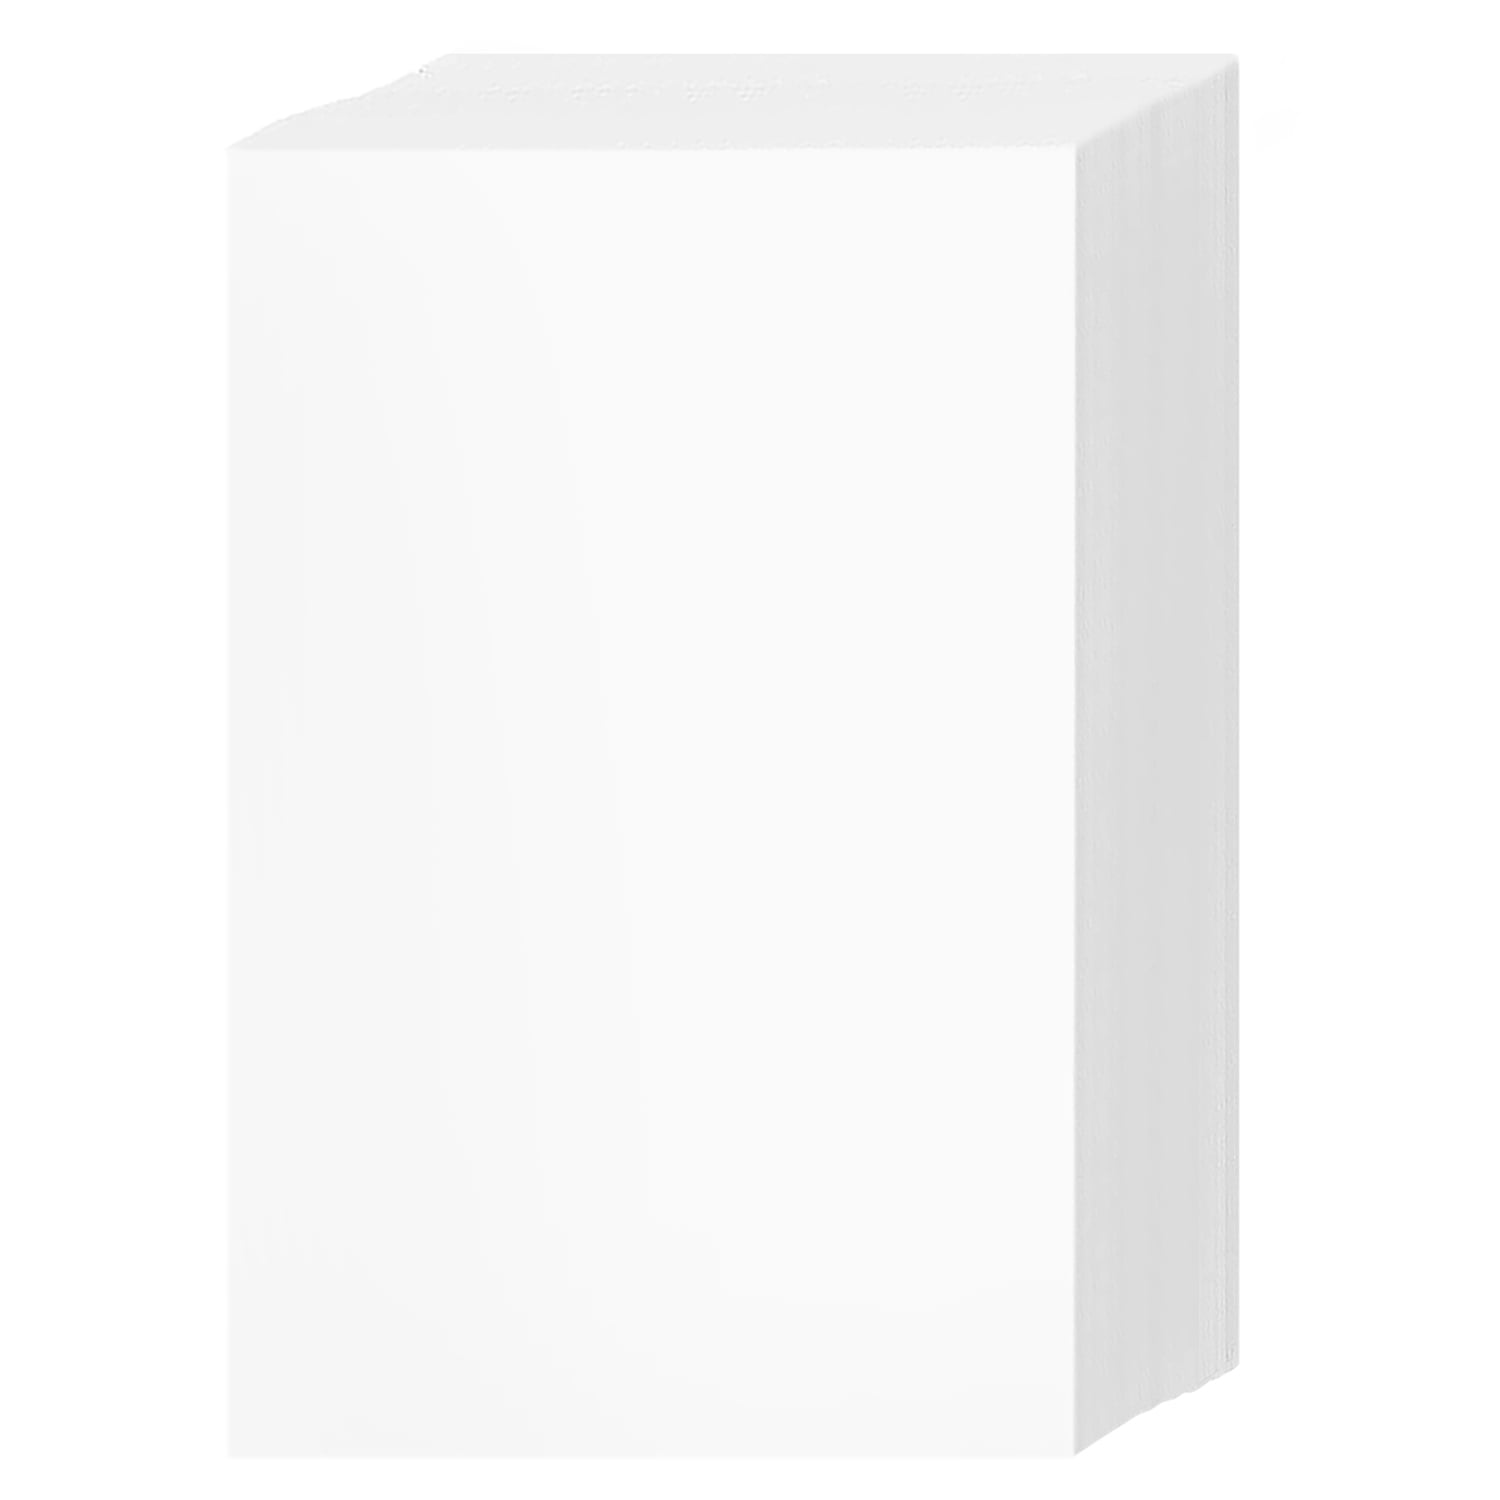 Half Letter Size Paper – Great for Business Documents, Letters, Arts,  Prints and Crafts, Copy, Printing, Writing, 8.5” x 5.5”, 20lb White Bond  Paper